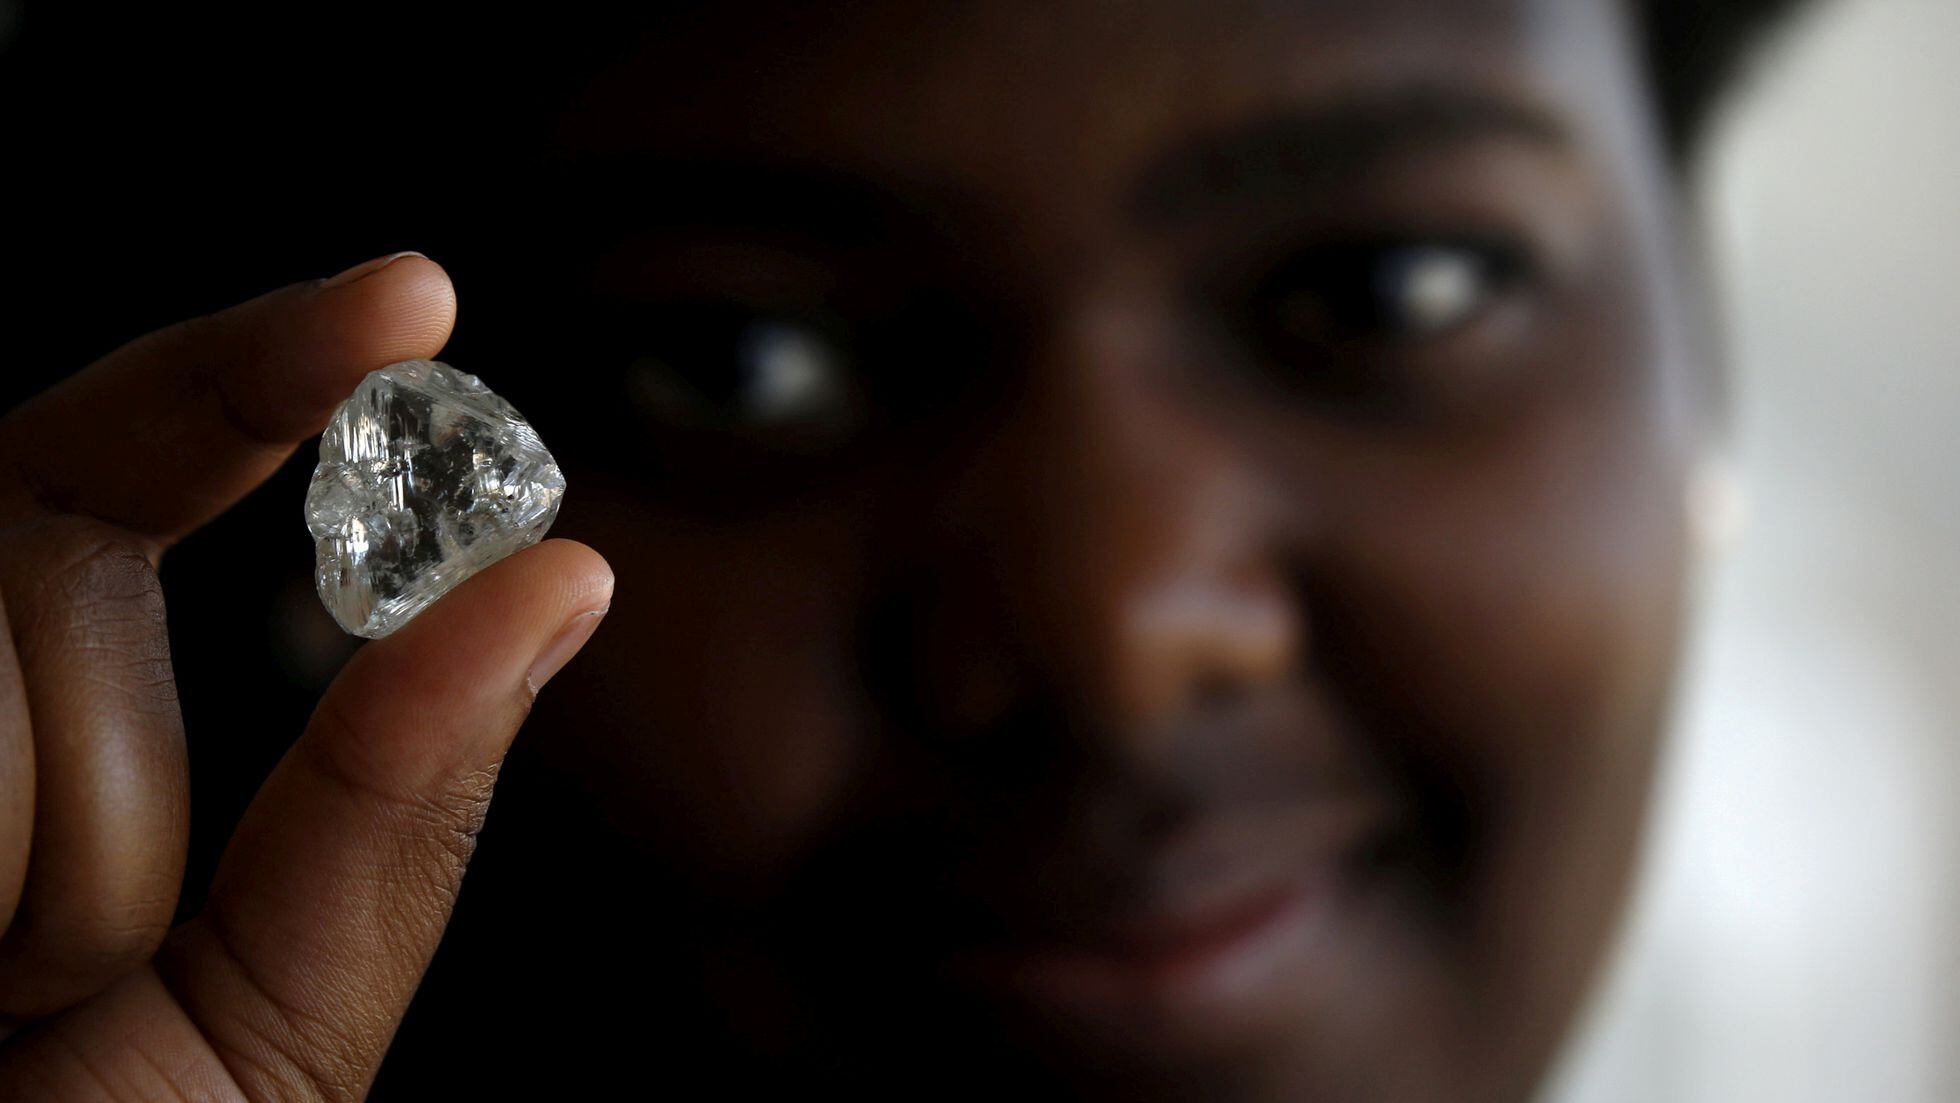 Diamond crisis gets worse for global giant De Beers - The Retail